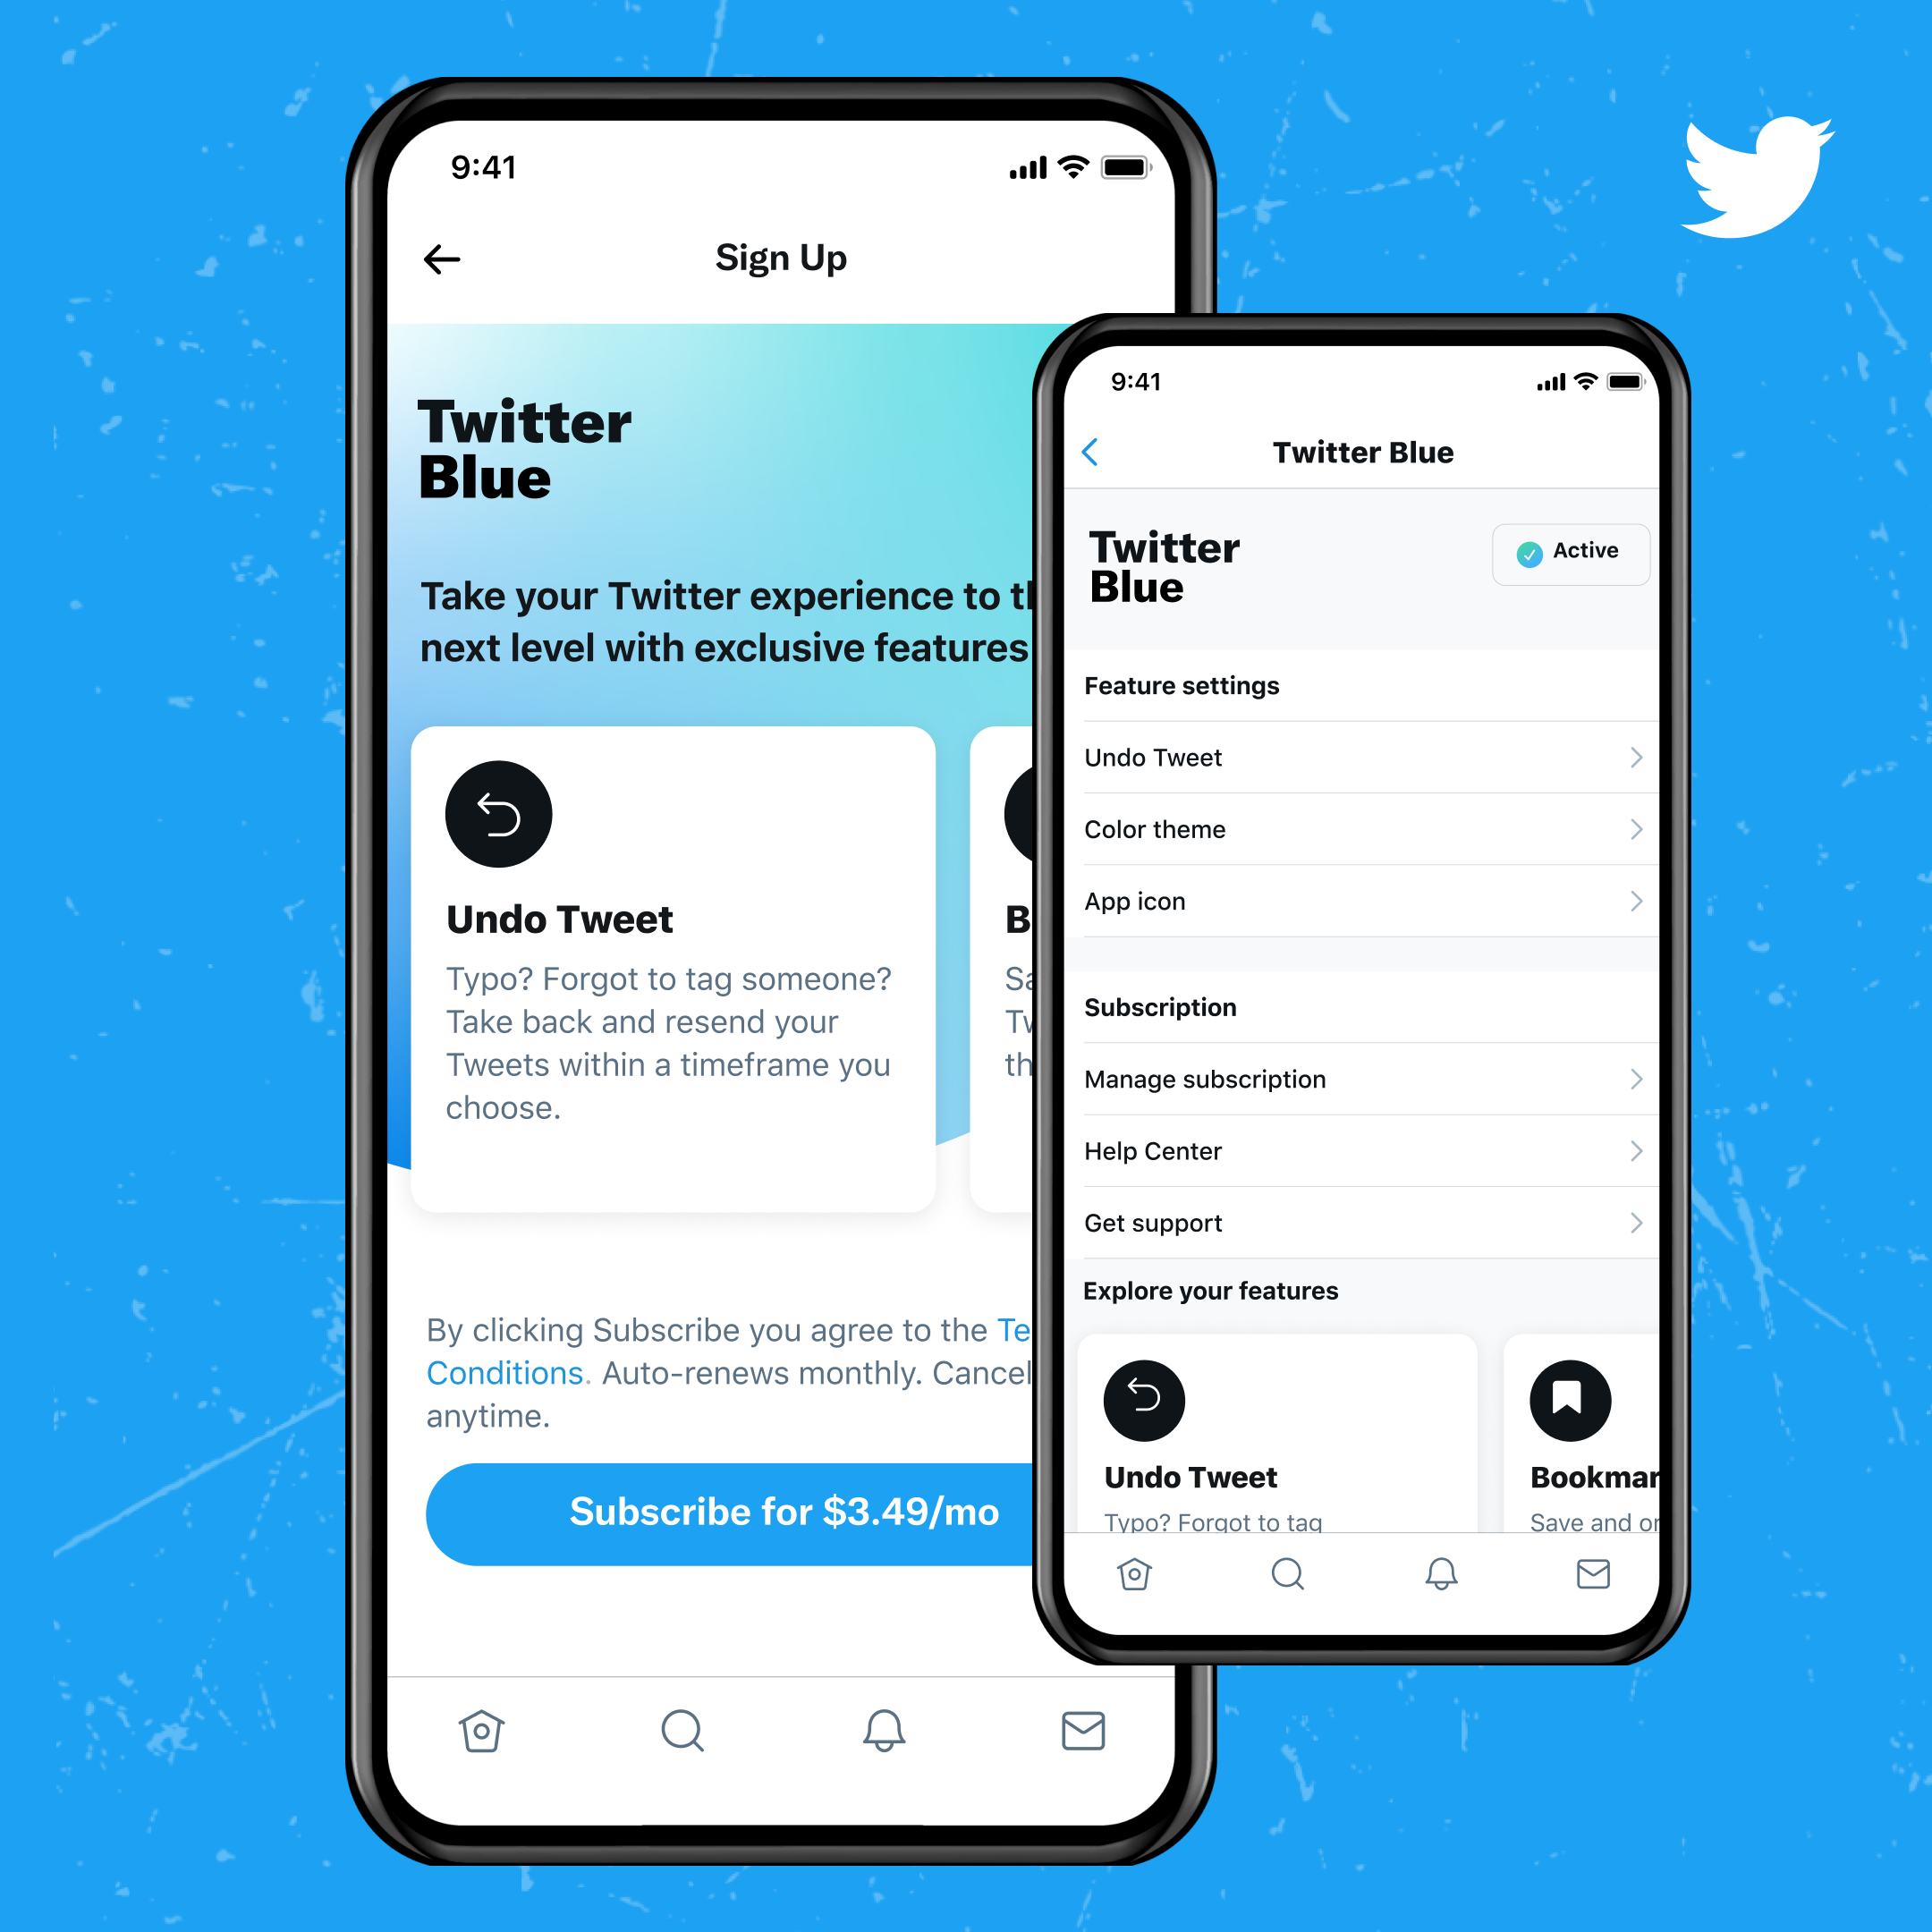 Twitter Blue is now available in UAE